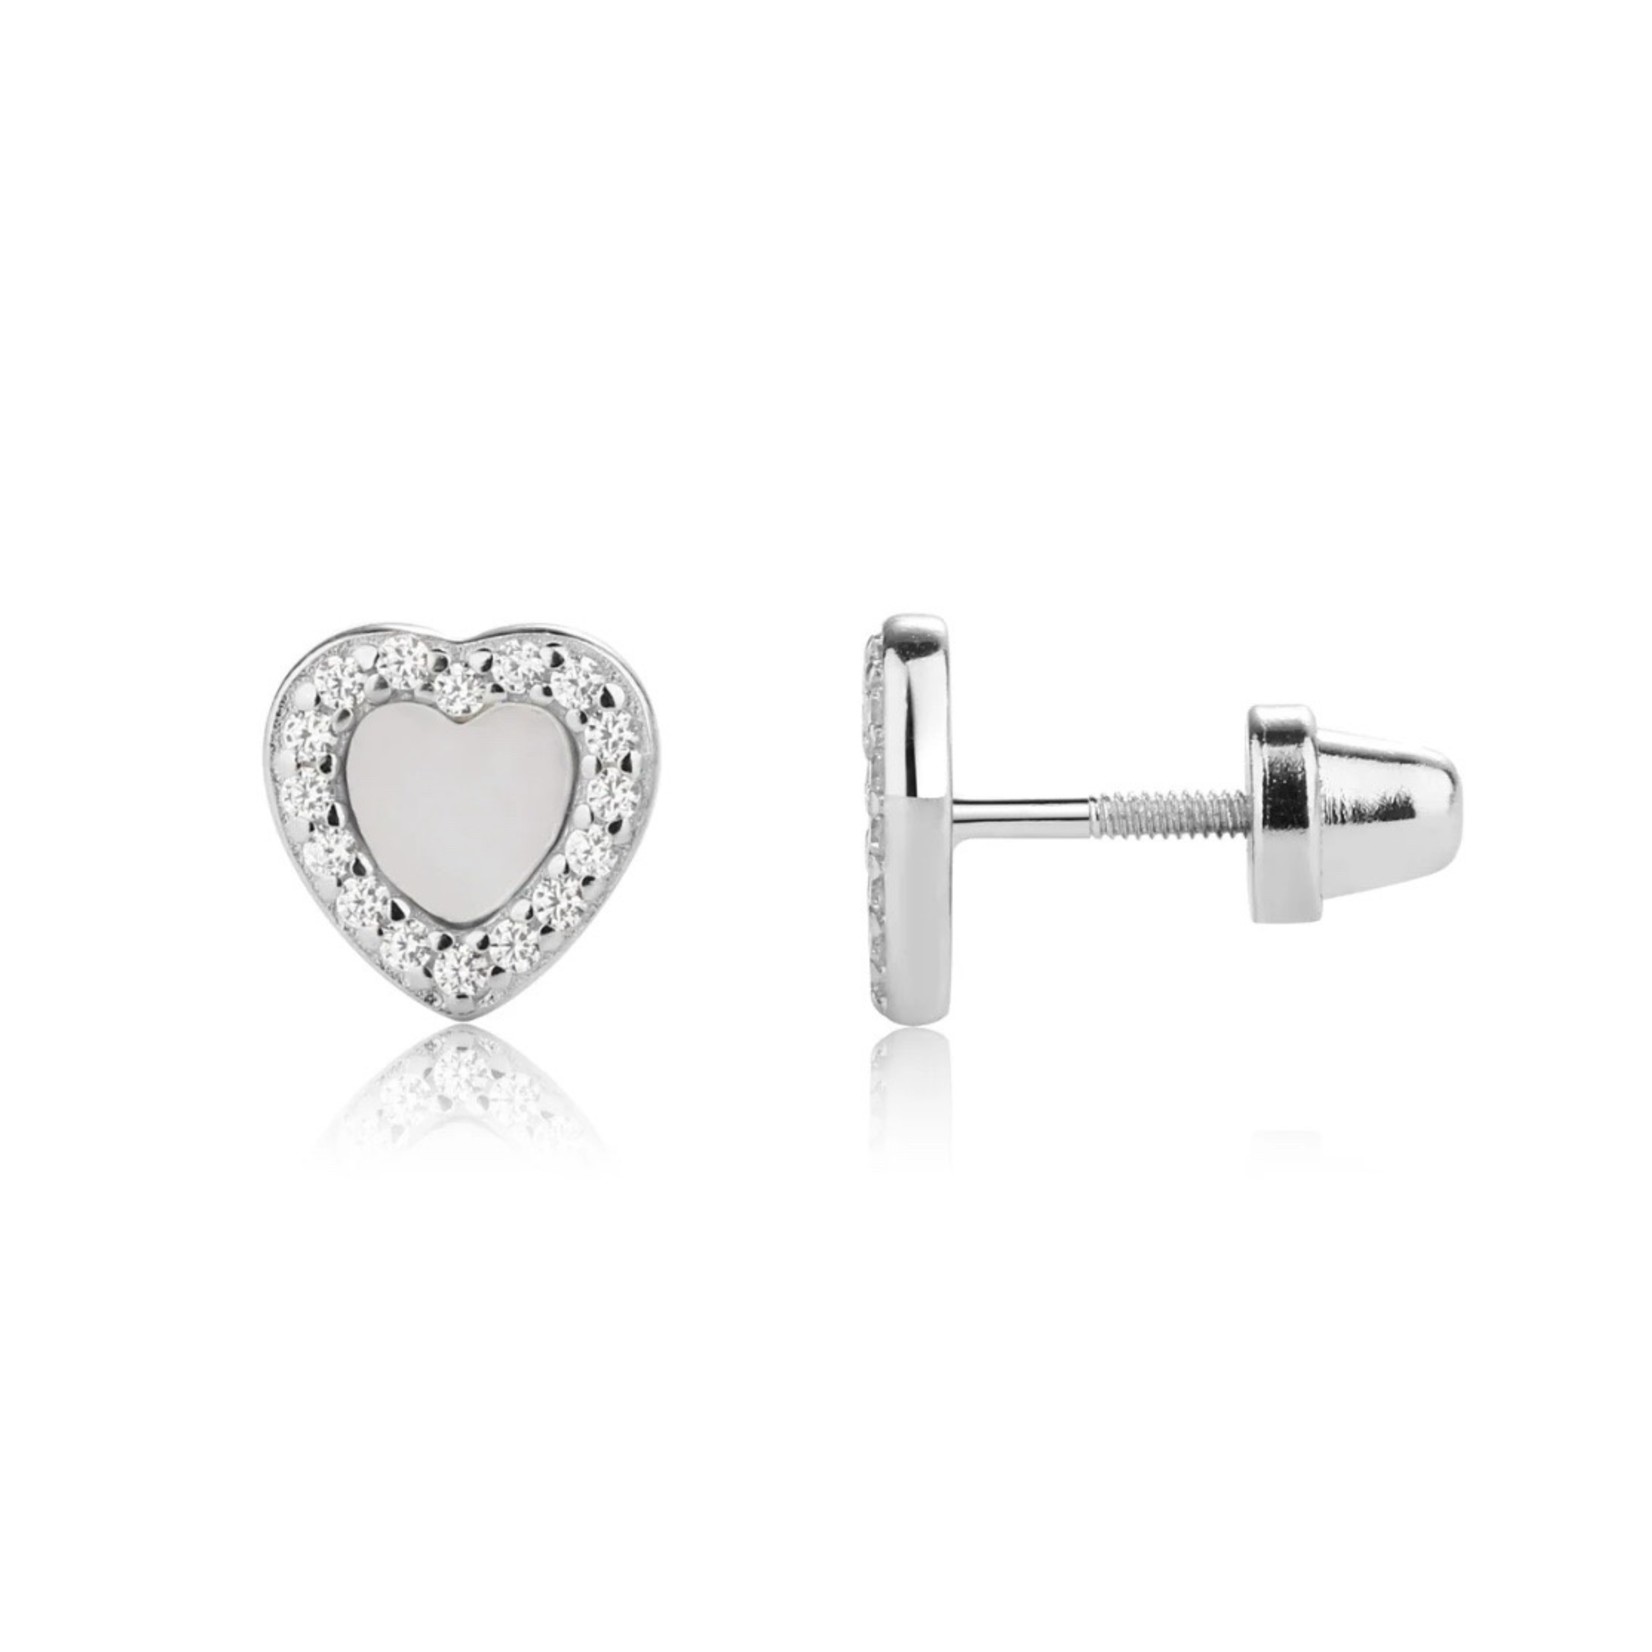 Cherished Moments Sterling Silver Mother of Pearl Heart Earrings